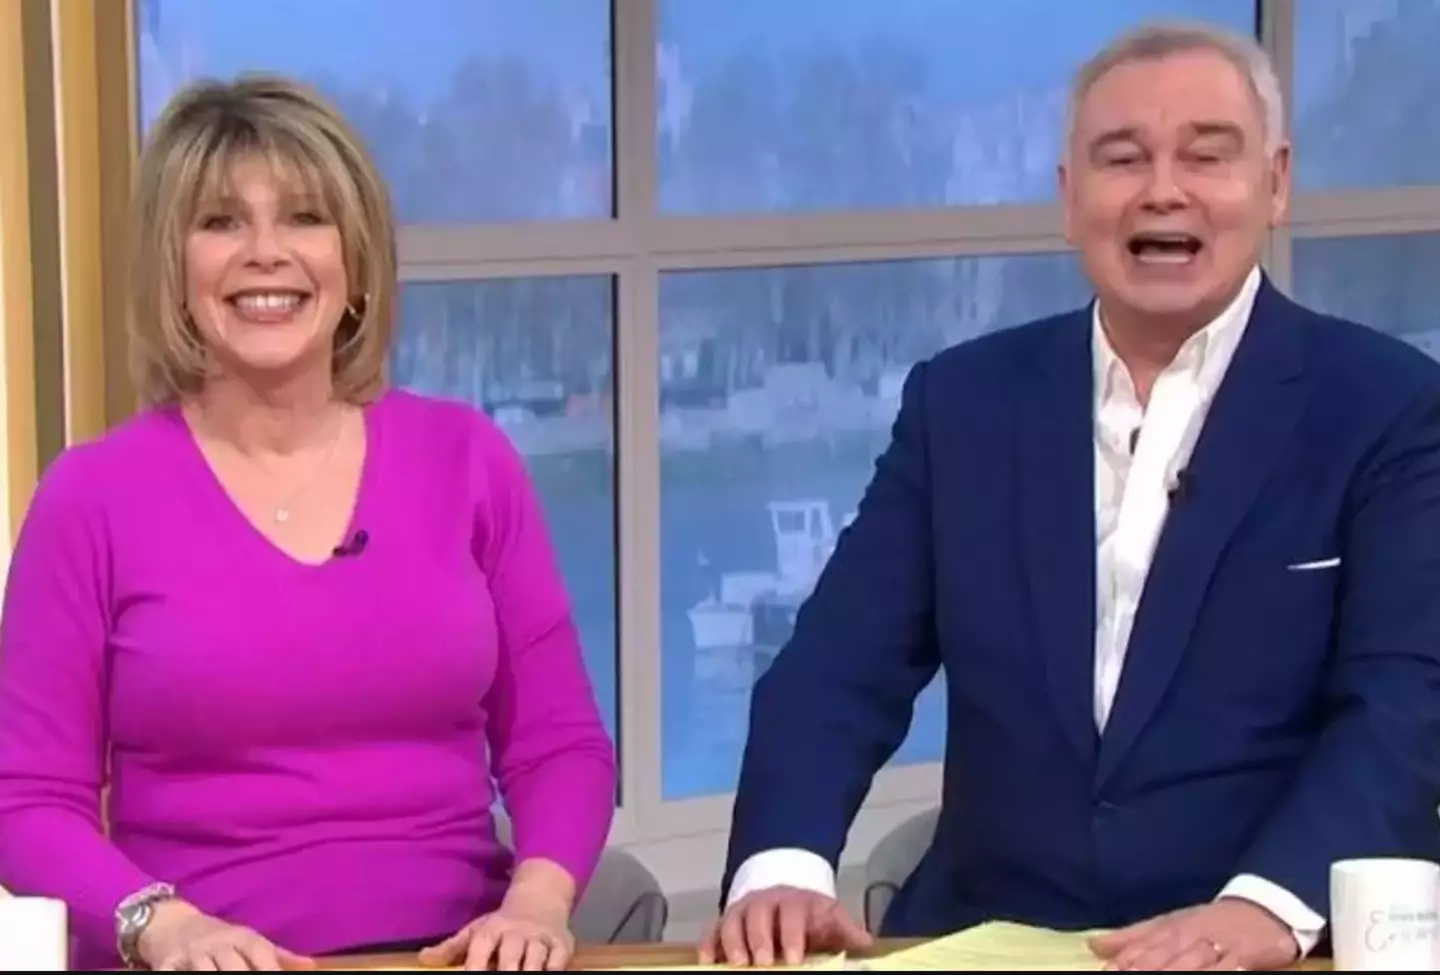 Ruth Langsford and Eamonn Holmes announced their divorce over the weekend (ITV)